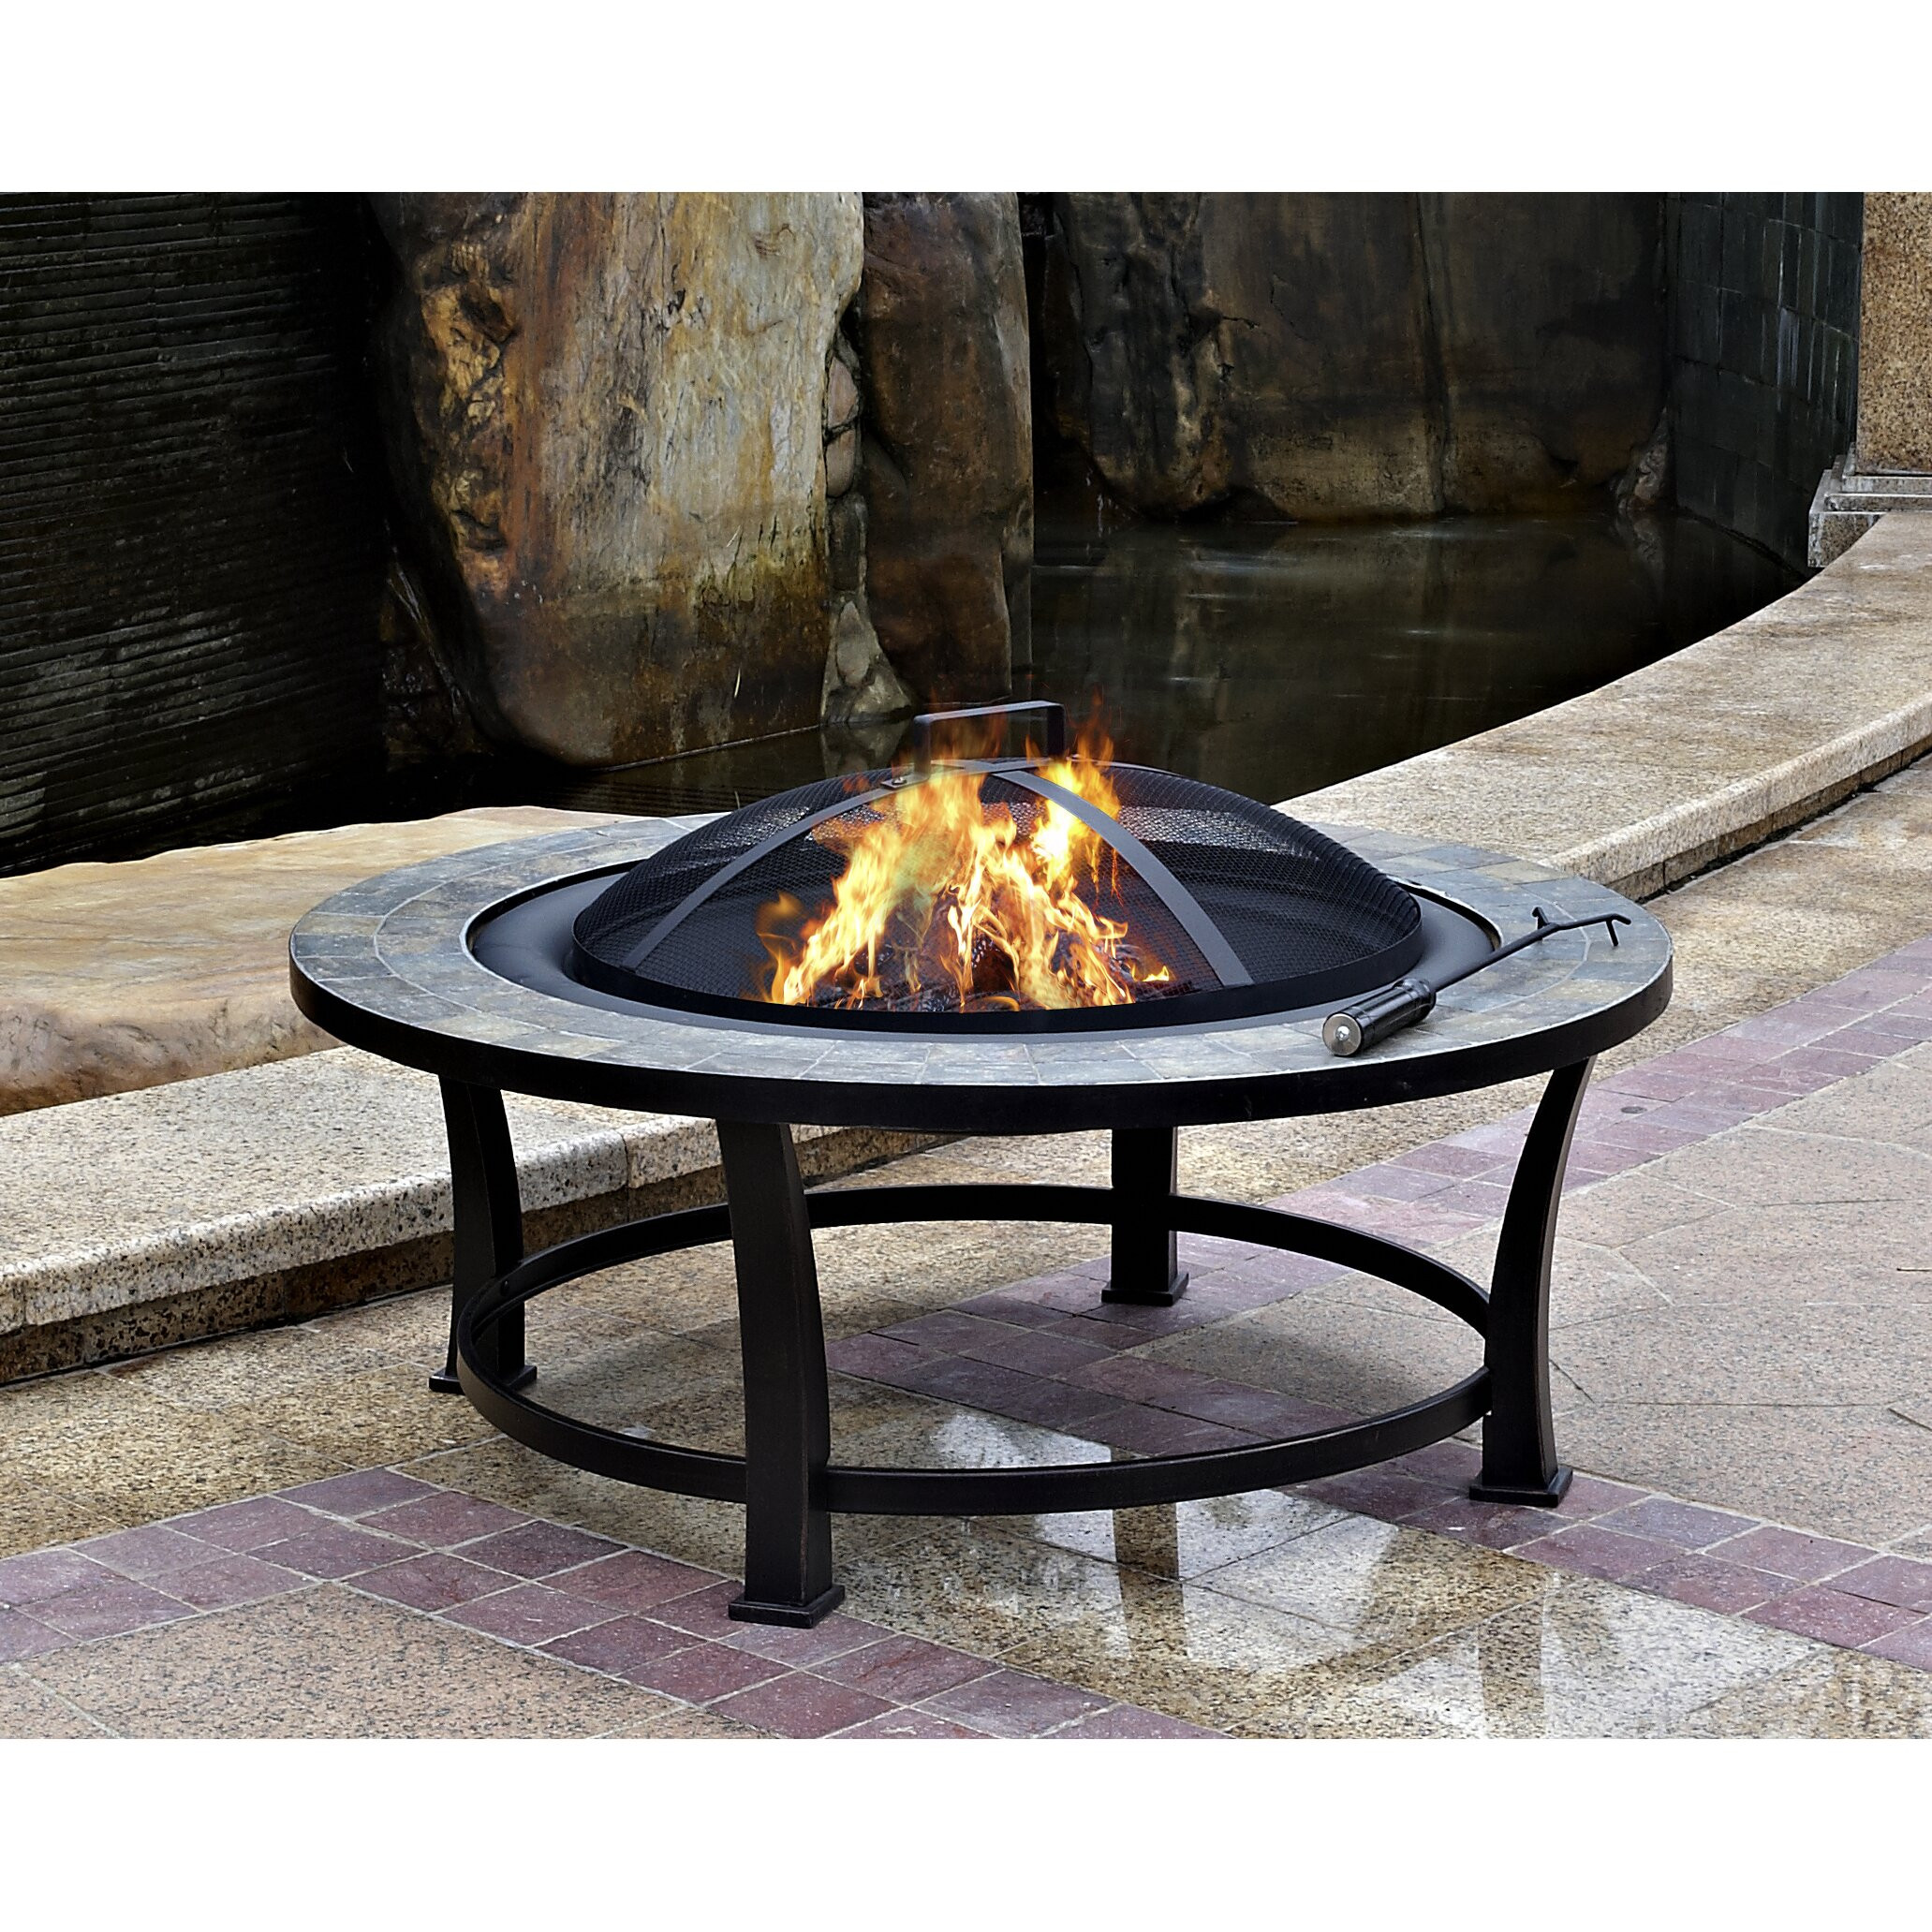 Fire Pit On Wood Deck
 AZ Patio Heaters Wood Burning Fire Pit & Reviews